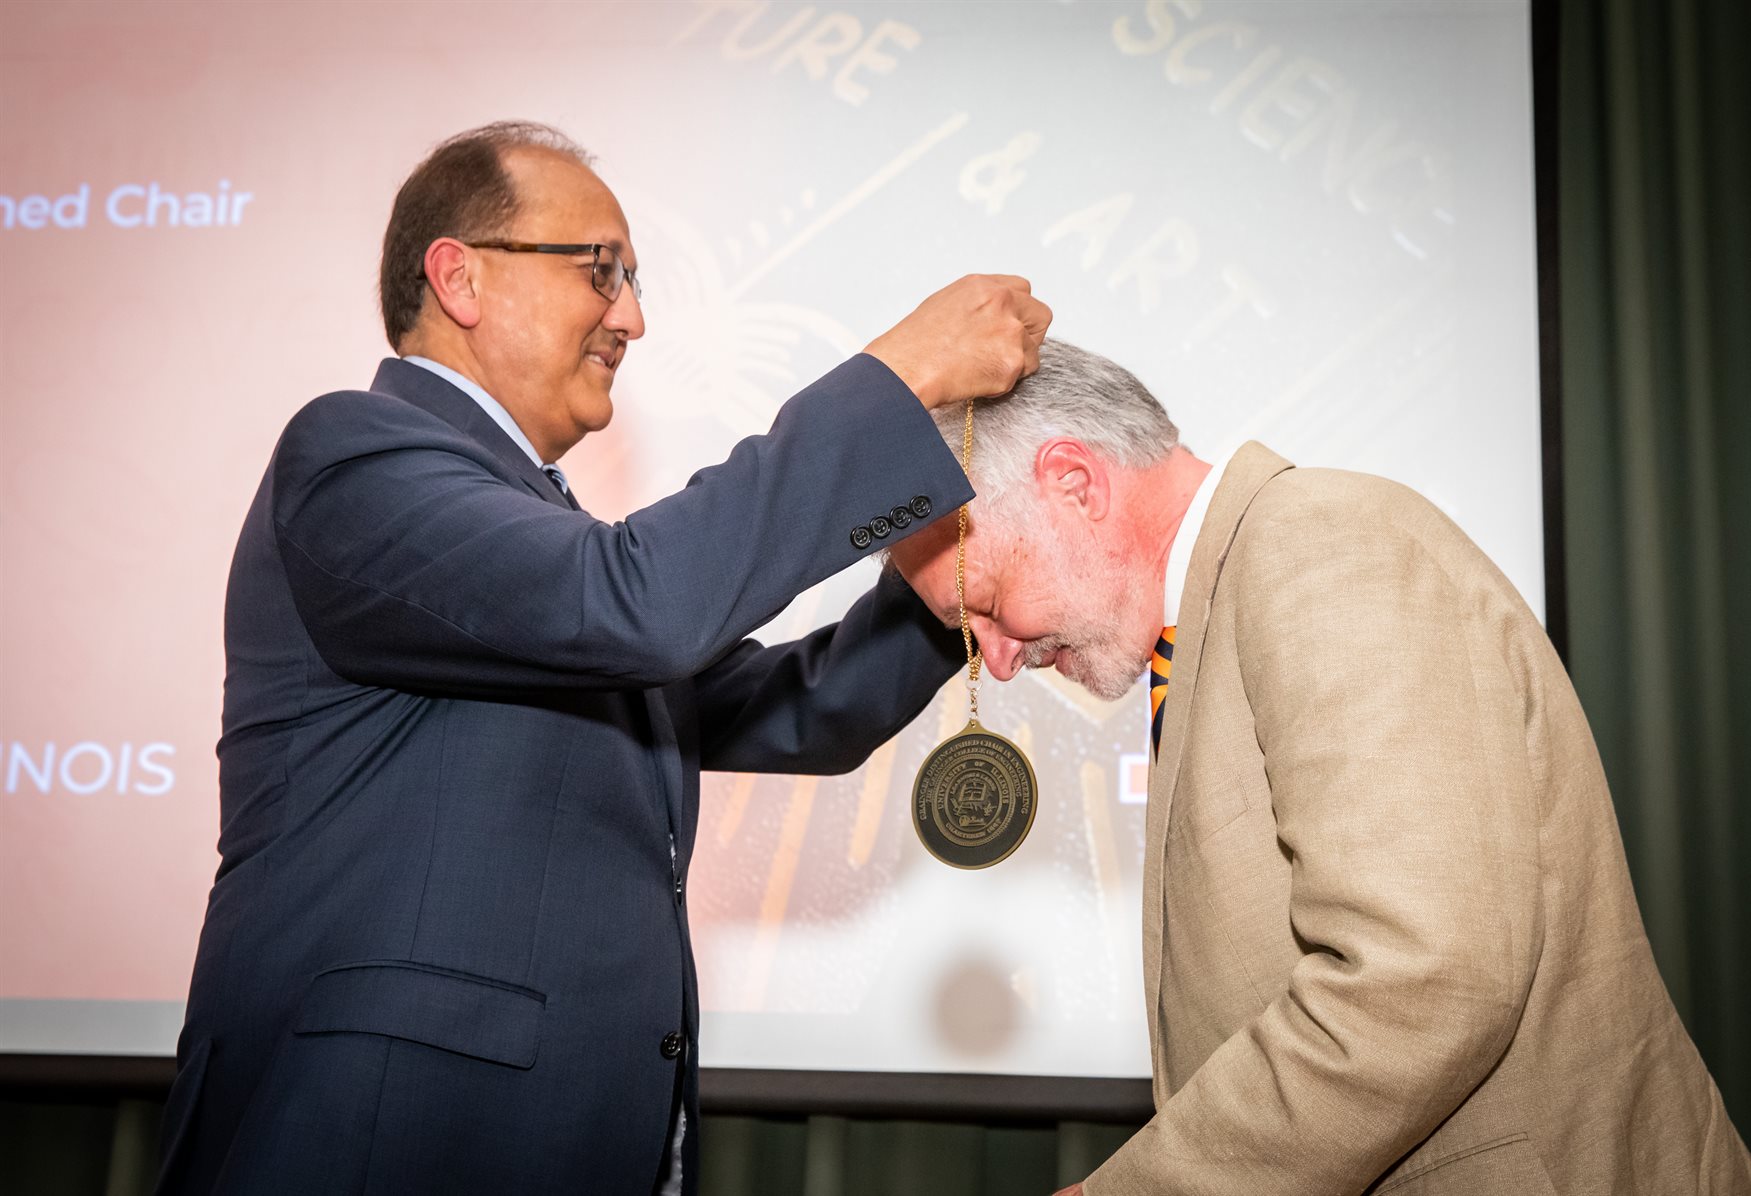 Fred Zwicky/Illinois News Bureau<br>Dean Rashid Bashir, left, bestows David Cahill his medallion for his investiture as the Grainger Distinguished Chair in Engineering during the Engineering Investiture Ceremony at the Beckman Institute in Urbana, Ill. on Monday, May 2.<br><br>Bashir shared that like Paul Braun, he, too, had to whip out his Macbook to feverishly take notes while in a meeting with Cahill about one of his research efforts.<br><br>"I was trying to use silicon transistors to do surface heating in fluids. I pretty much had to go back and rewrite the paper after the meeting," Bashir joked.<br><br>Jokes aside, the Grainger Engineering dean said he admires Cahill's leadership, especially when he was MatSE's department head.<br><br>"One of my aspirations (has) always been to do administration but then make it integrated with research so essentially stay research active," Bashir said."I used to look at David as a department head (and see) that he continued to do so, (and) I really, really appreciate that."